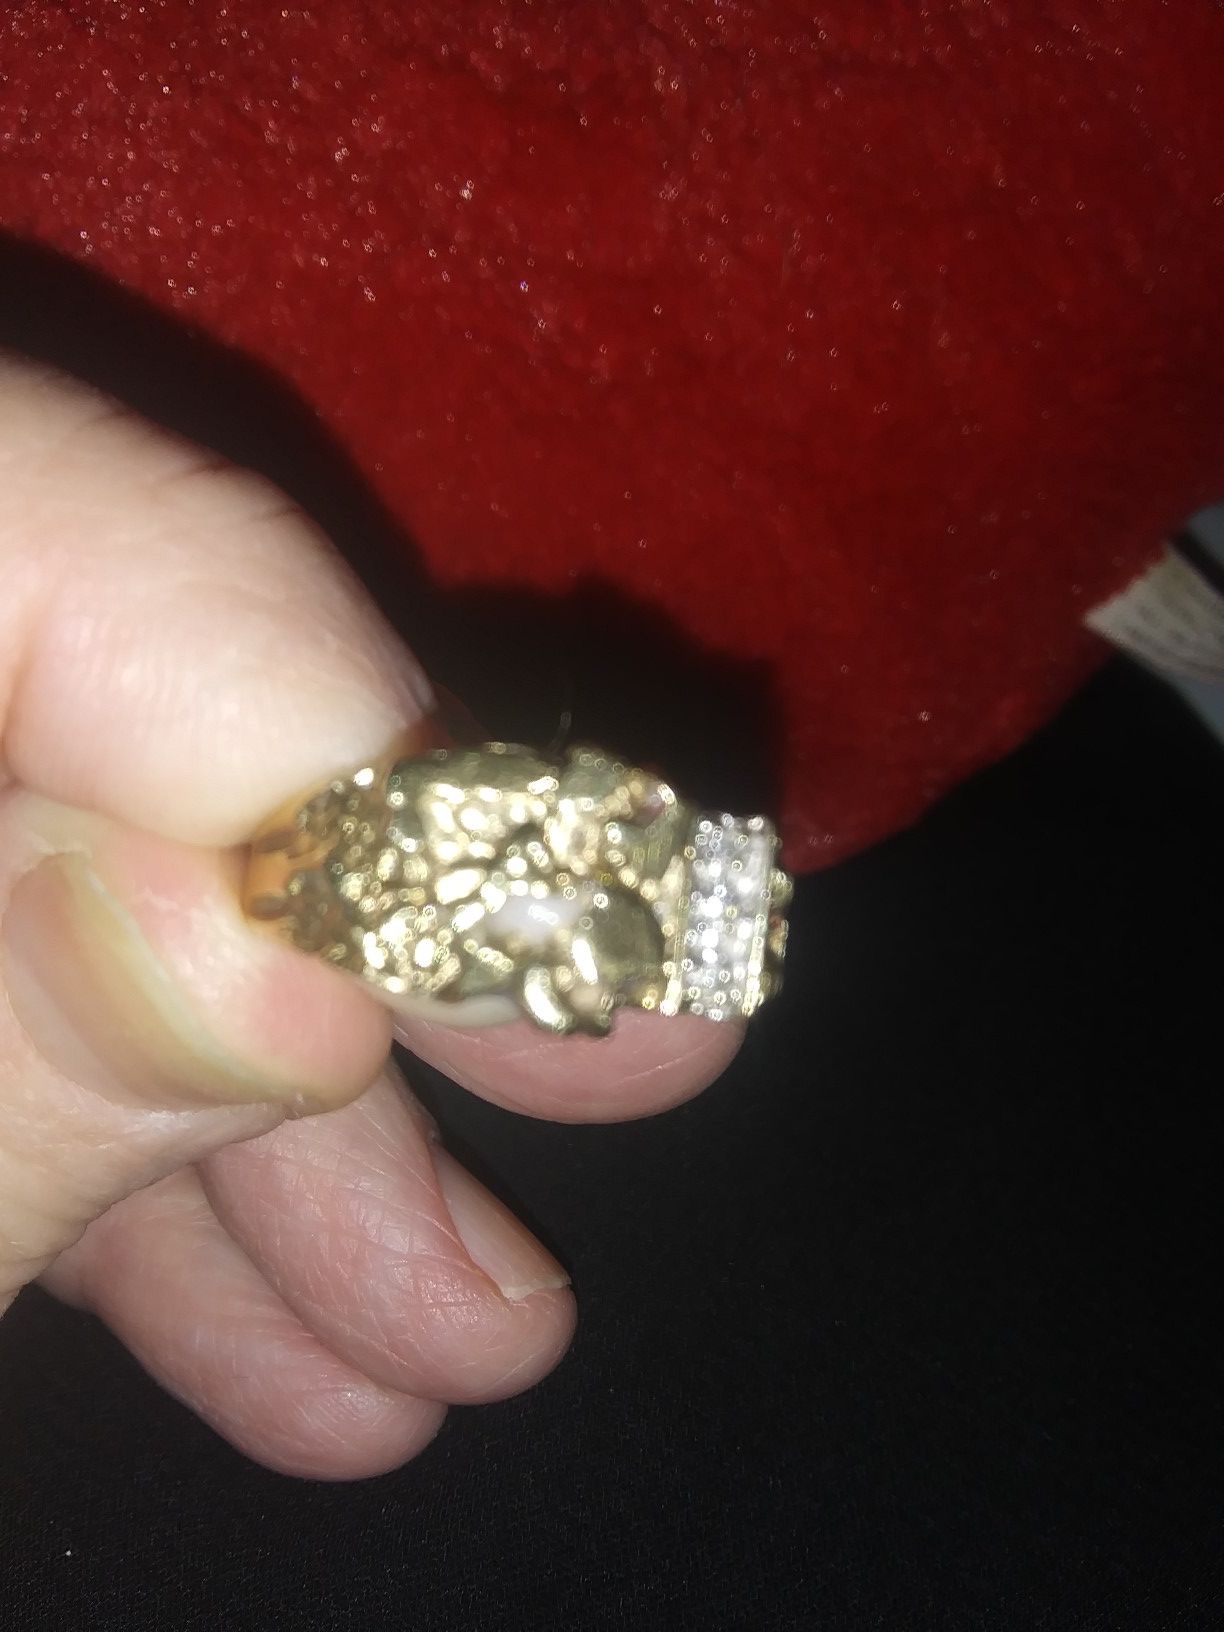 Gold nugget ring with three diamonds on the side. This ring is real. It cost 1100.00 dollar. Will sell for $400.00